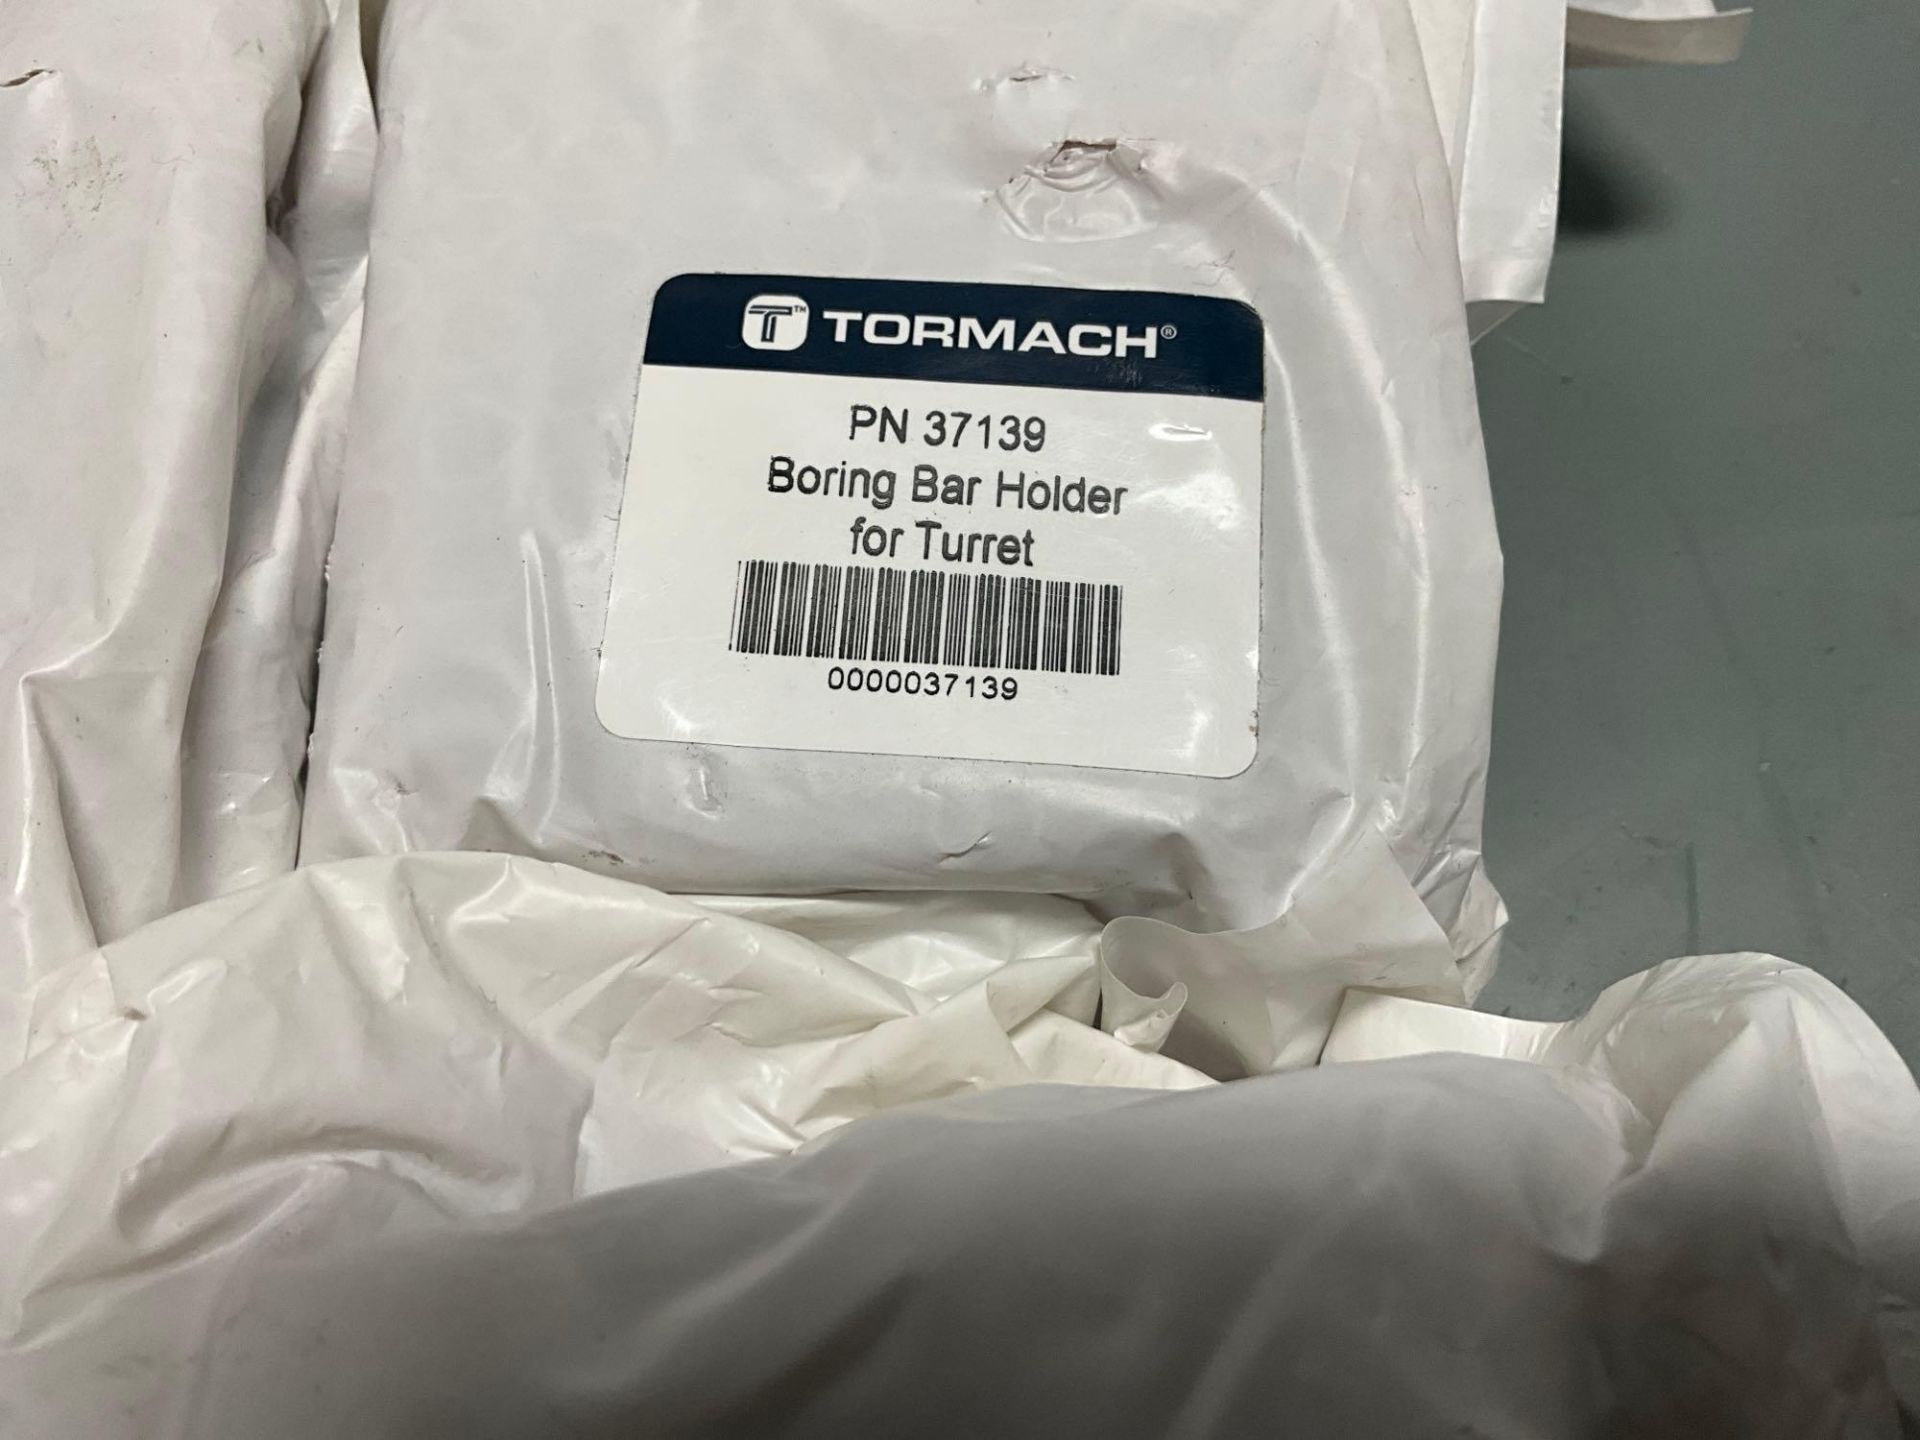 (8) TORMACH PN 37139 BORING BAR HOLDER FOR TURRET, LATHE TOOLING NEW - Image 3 of 3